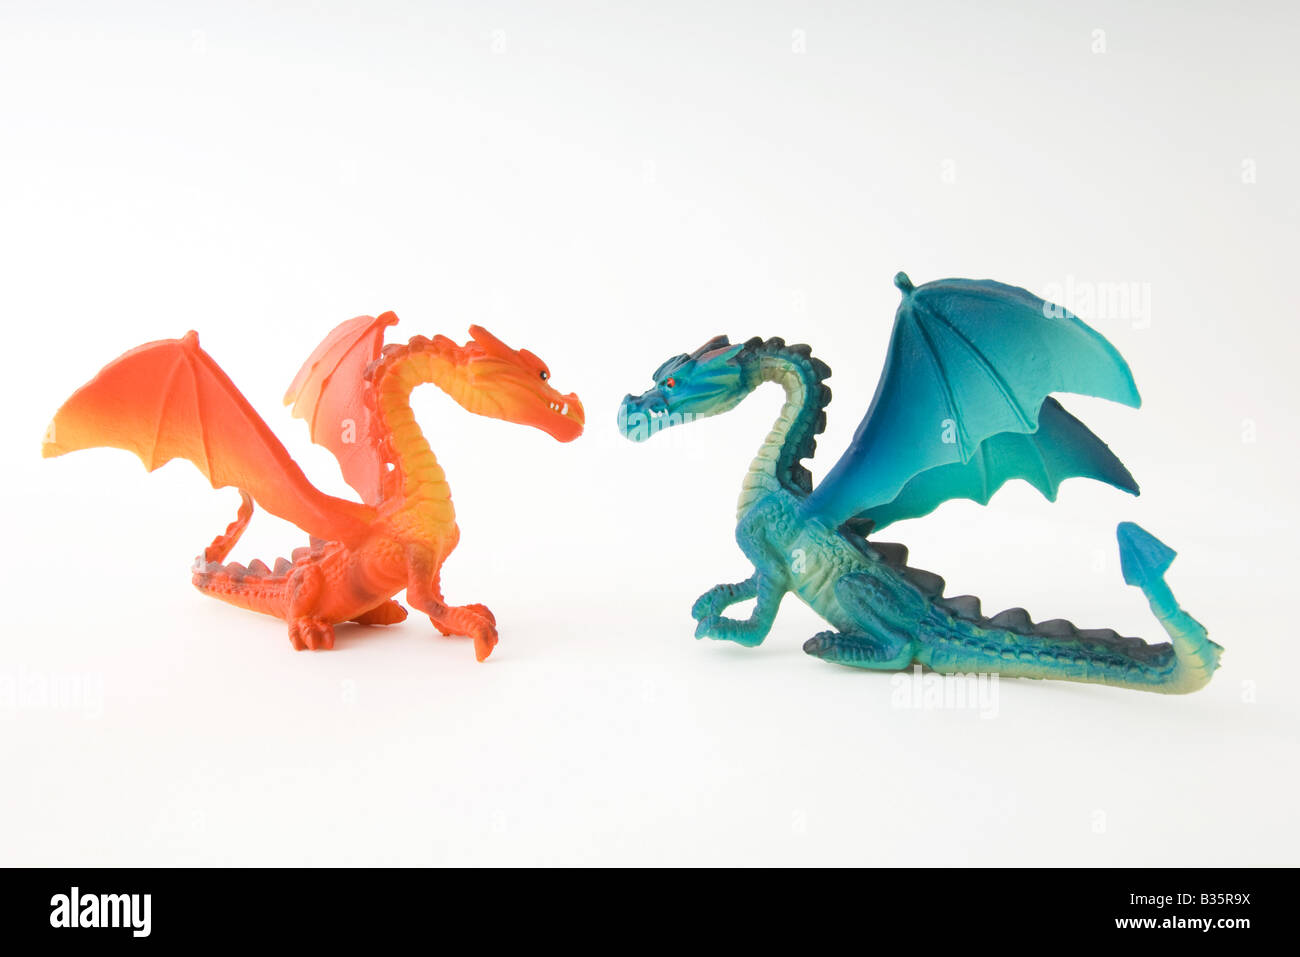 Toy dragons face to face, side view Stock Photo